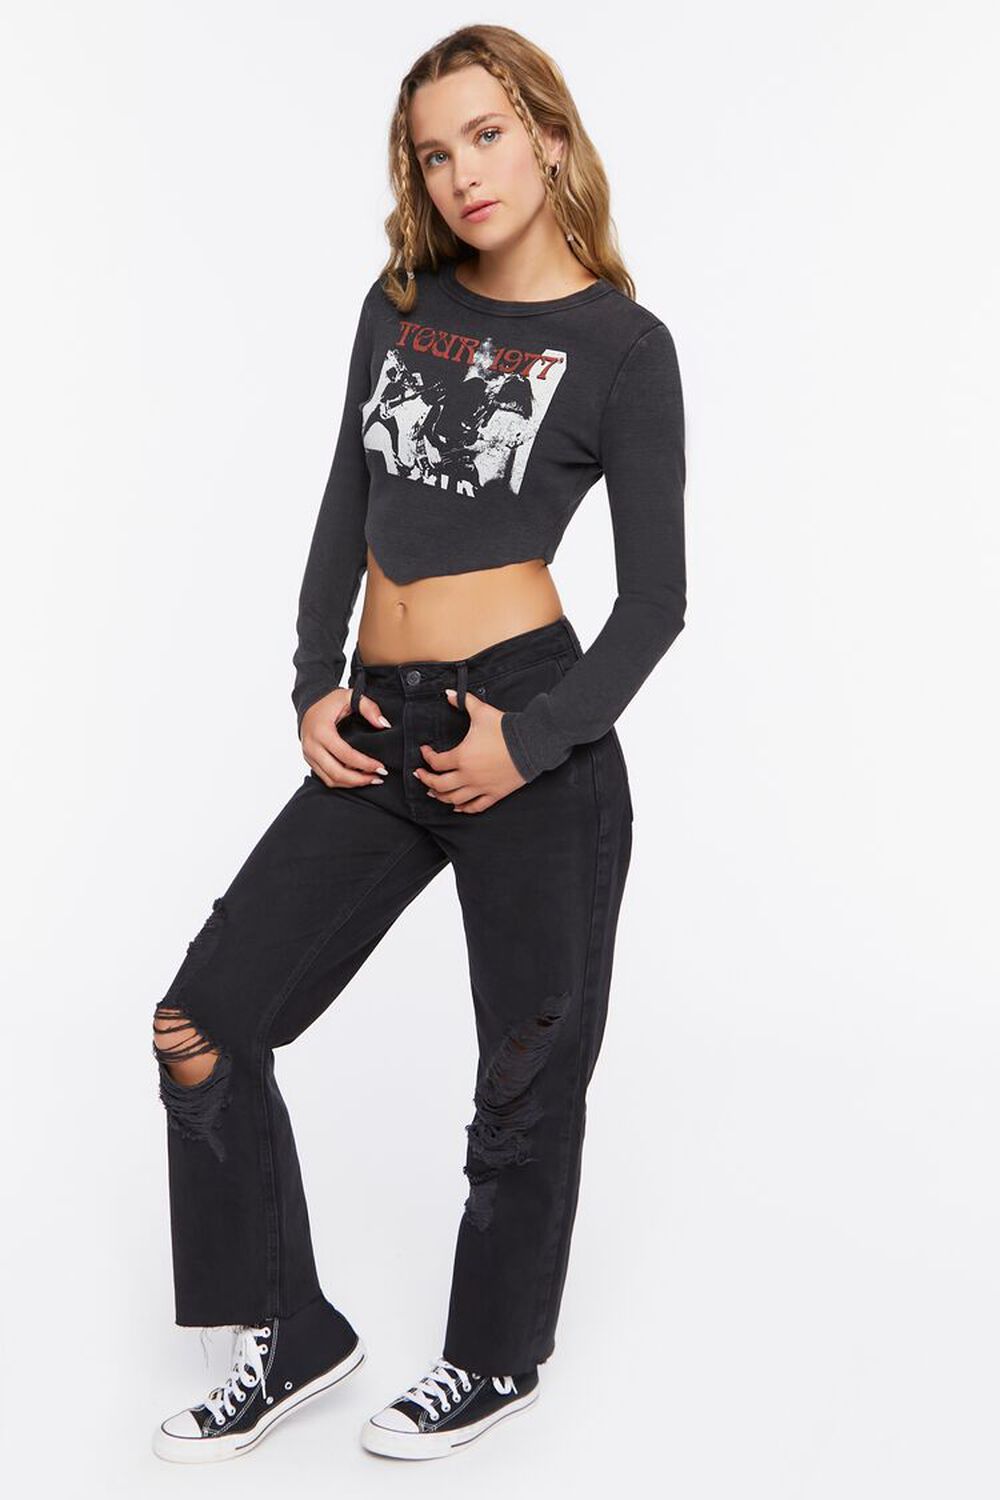 BLACK Distressed Bootcut Jeans, image 1